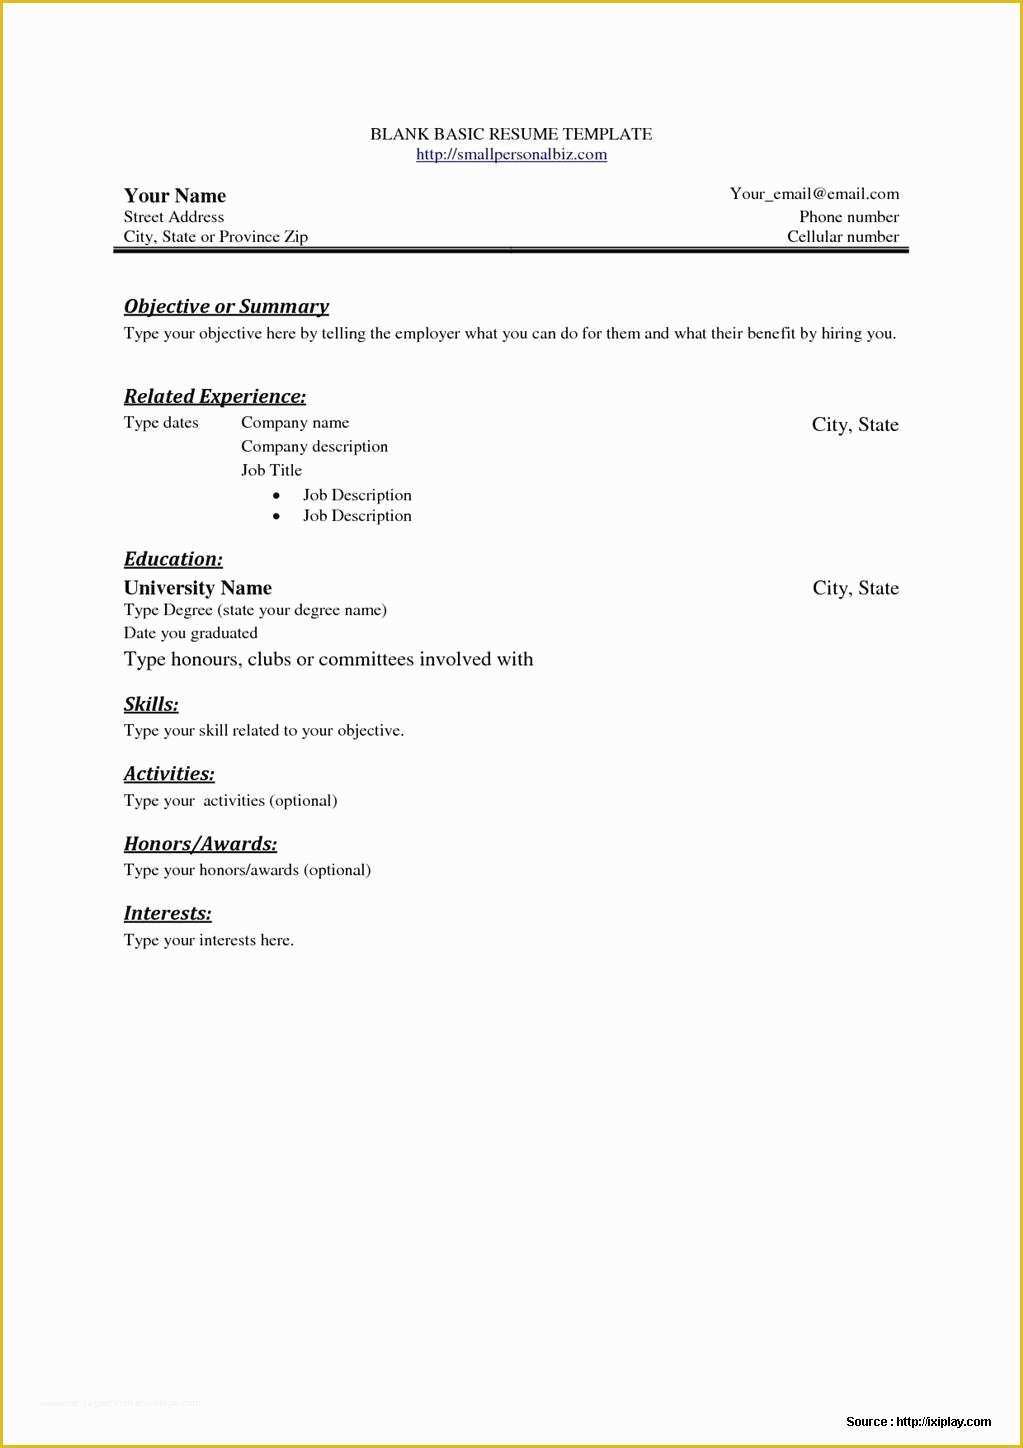 Free Resume Templates for Word Starter 2010 Of Free Resume Templates for Word Starter 2010 Resume